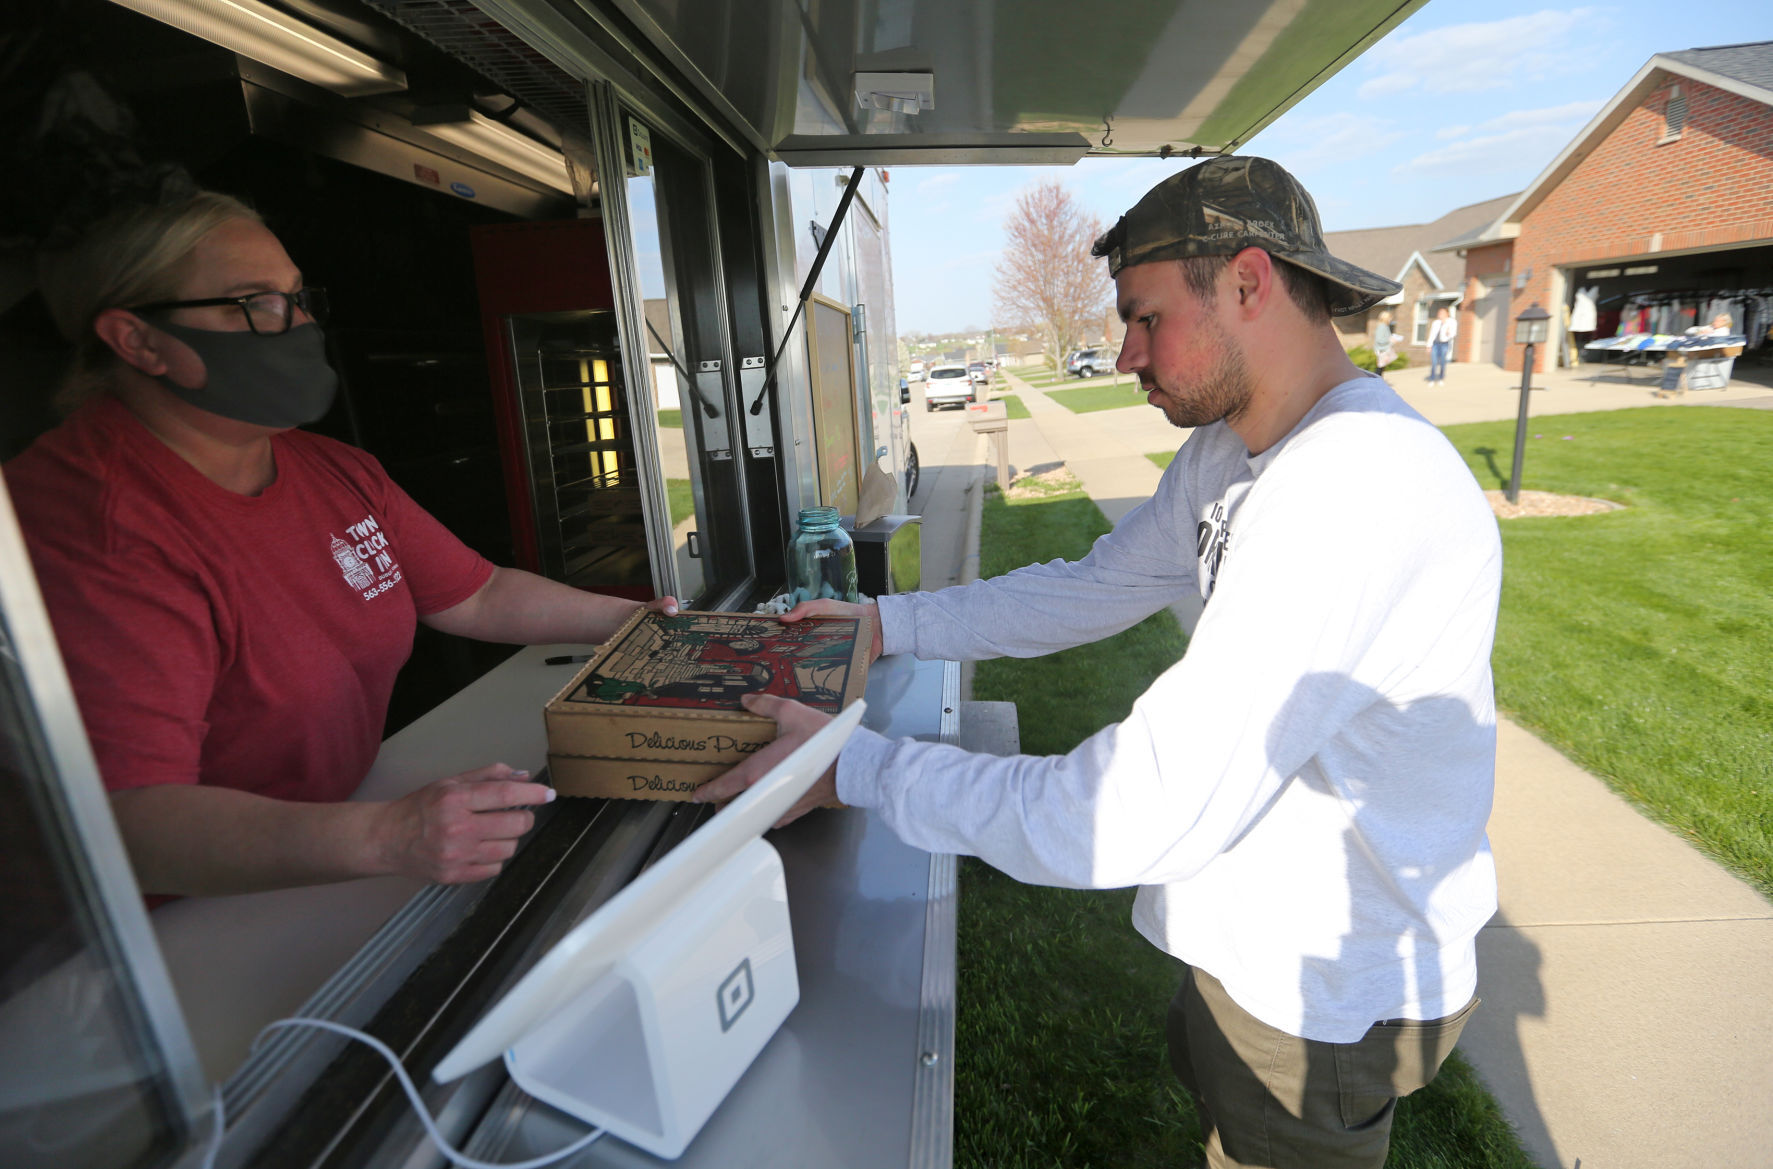 Caleb Snyder grabs a pizza from Irene Nelson, co-owner of Town Clock Inn, on Thursday in Asbury, Iowa. PHOTO CREDIT: JESSICA REILLY